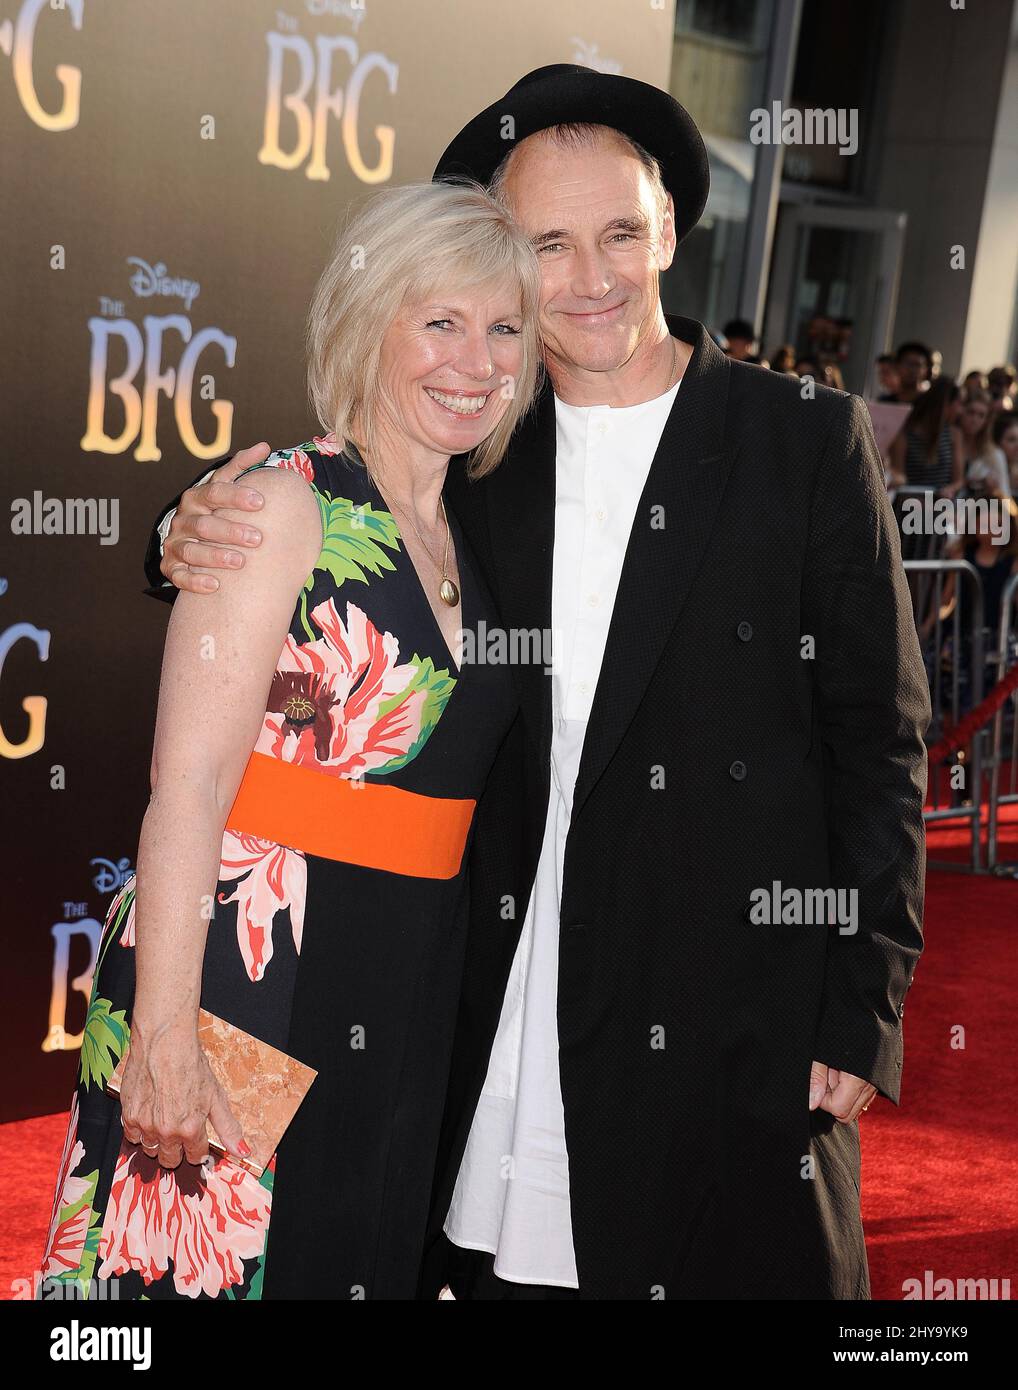 Mark Rylance, Claire van Kampen attending the premiere of 'The BFG' in Los Angeles. Stock Photo